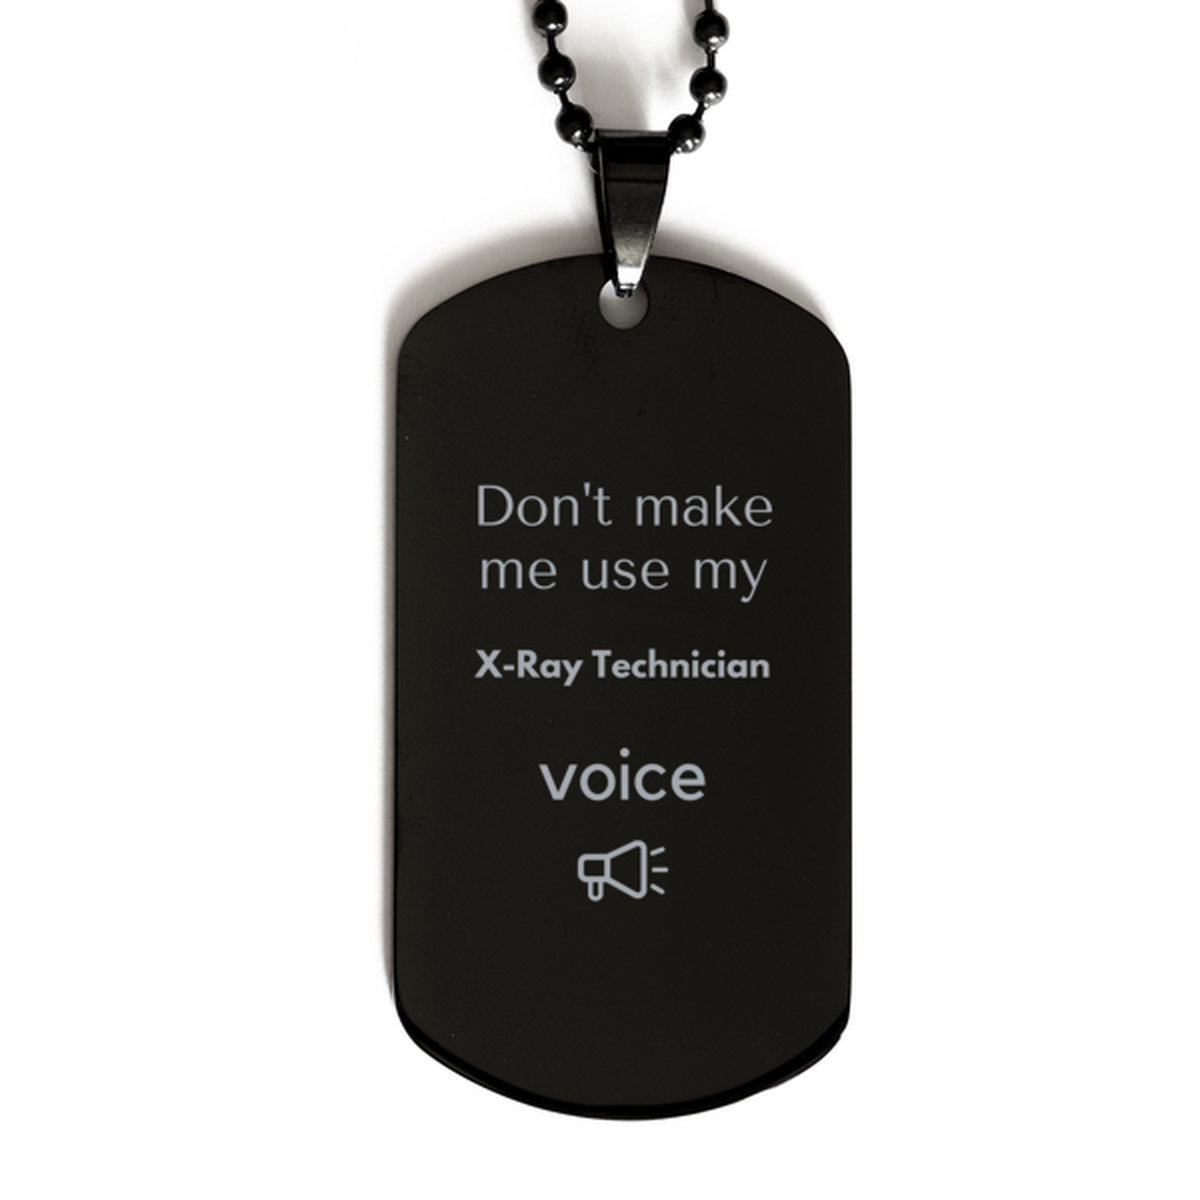 Don't make me use my X-Ray Technician voice, Sarcasm X-Ray Technician Gifts, Christmas X-Ray Technician Black Dog Tag Birthday Unique Gifts For X-Ray Technician Coworkers, Men, Women, Colleague, Friends